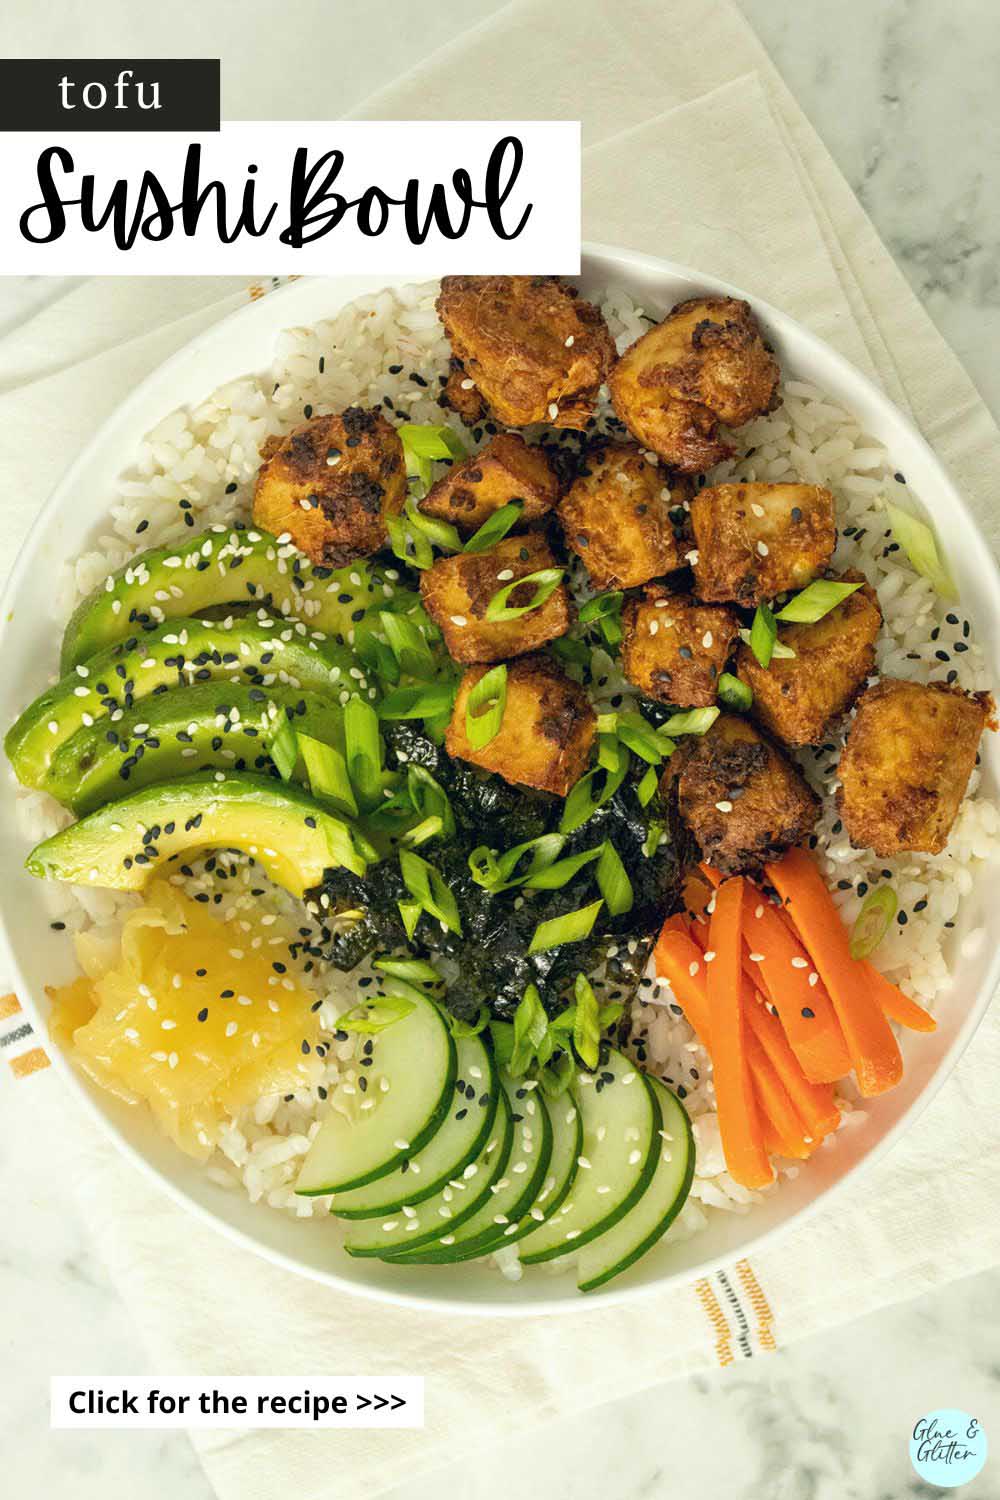 tofu sushi bowl with fresh veggies, pickled ginger, and sesame seeds on a marble table, text overlay